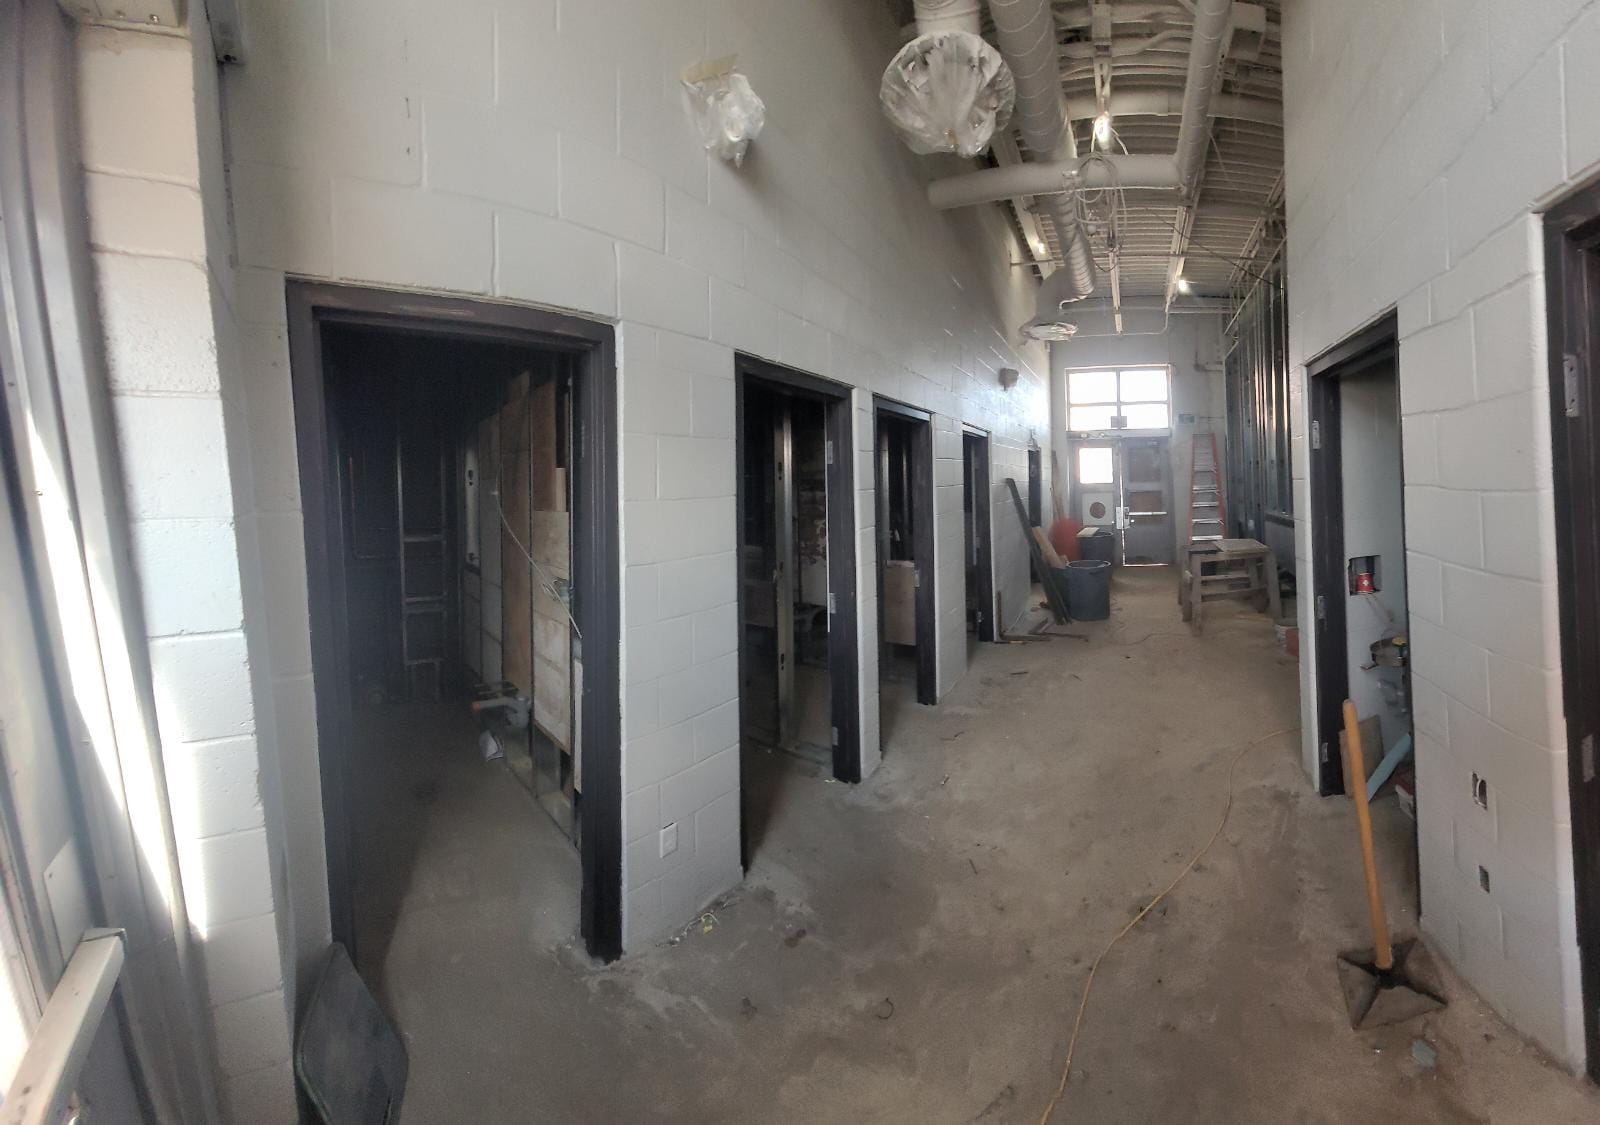 A photo of the interior of the Clubhouse in Dufferin Grove Park during construction which shows a hallway with doorways to seven different rooms. Construction equipment can be found throughout. 